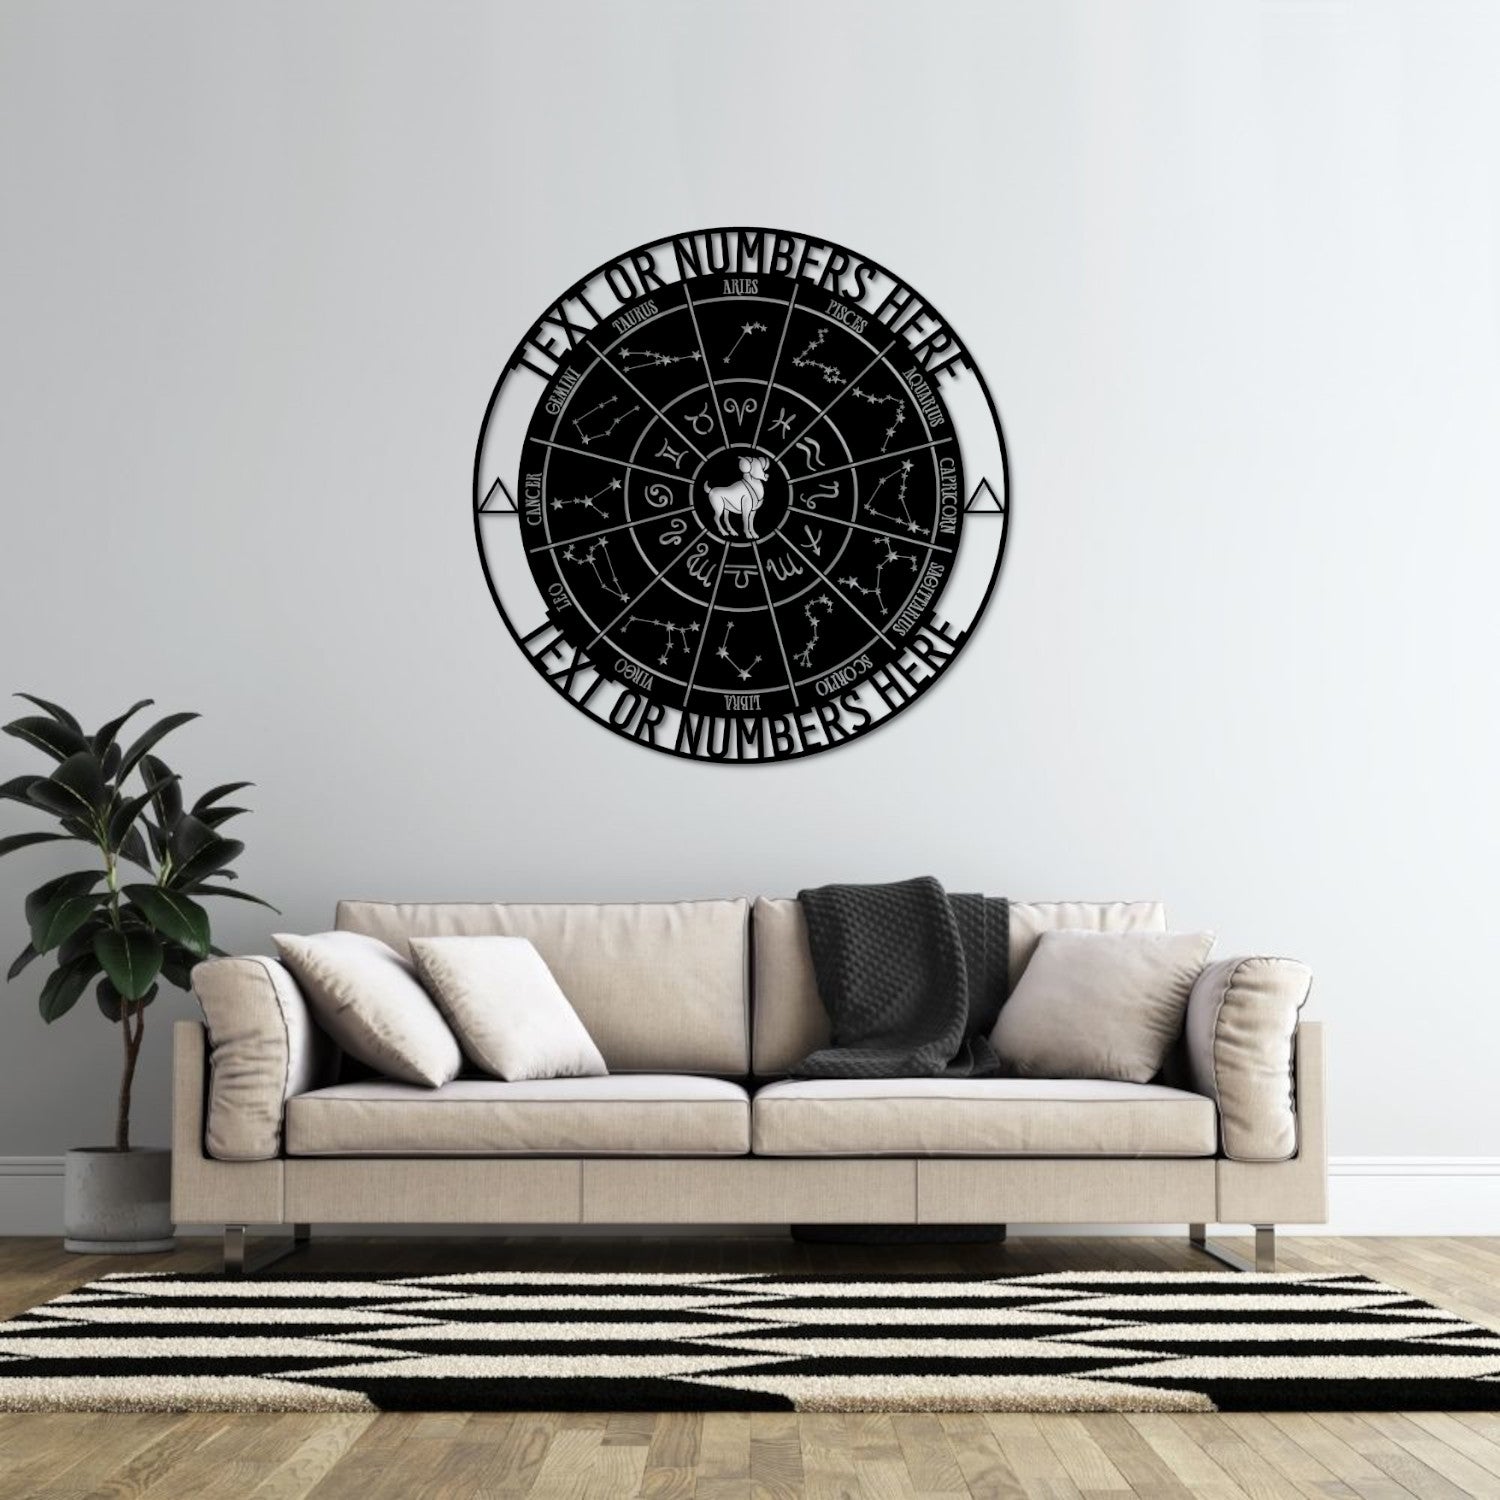 Personalized Aries Zodiac Wheel Name Metal Sign. Custom Astrology Date Wall Decor. Celestial Gifts. Decorative Aries Star Sign Wall Hanging